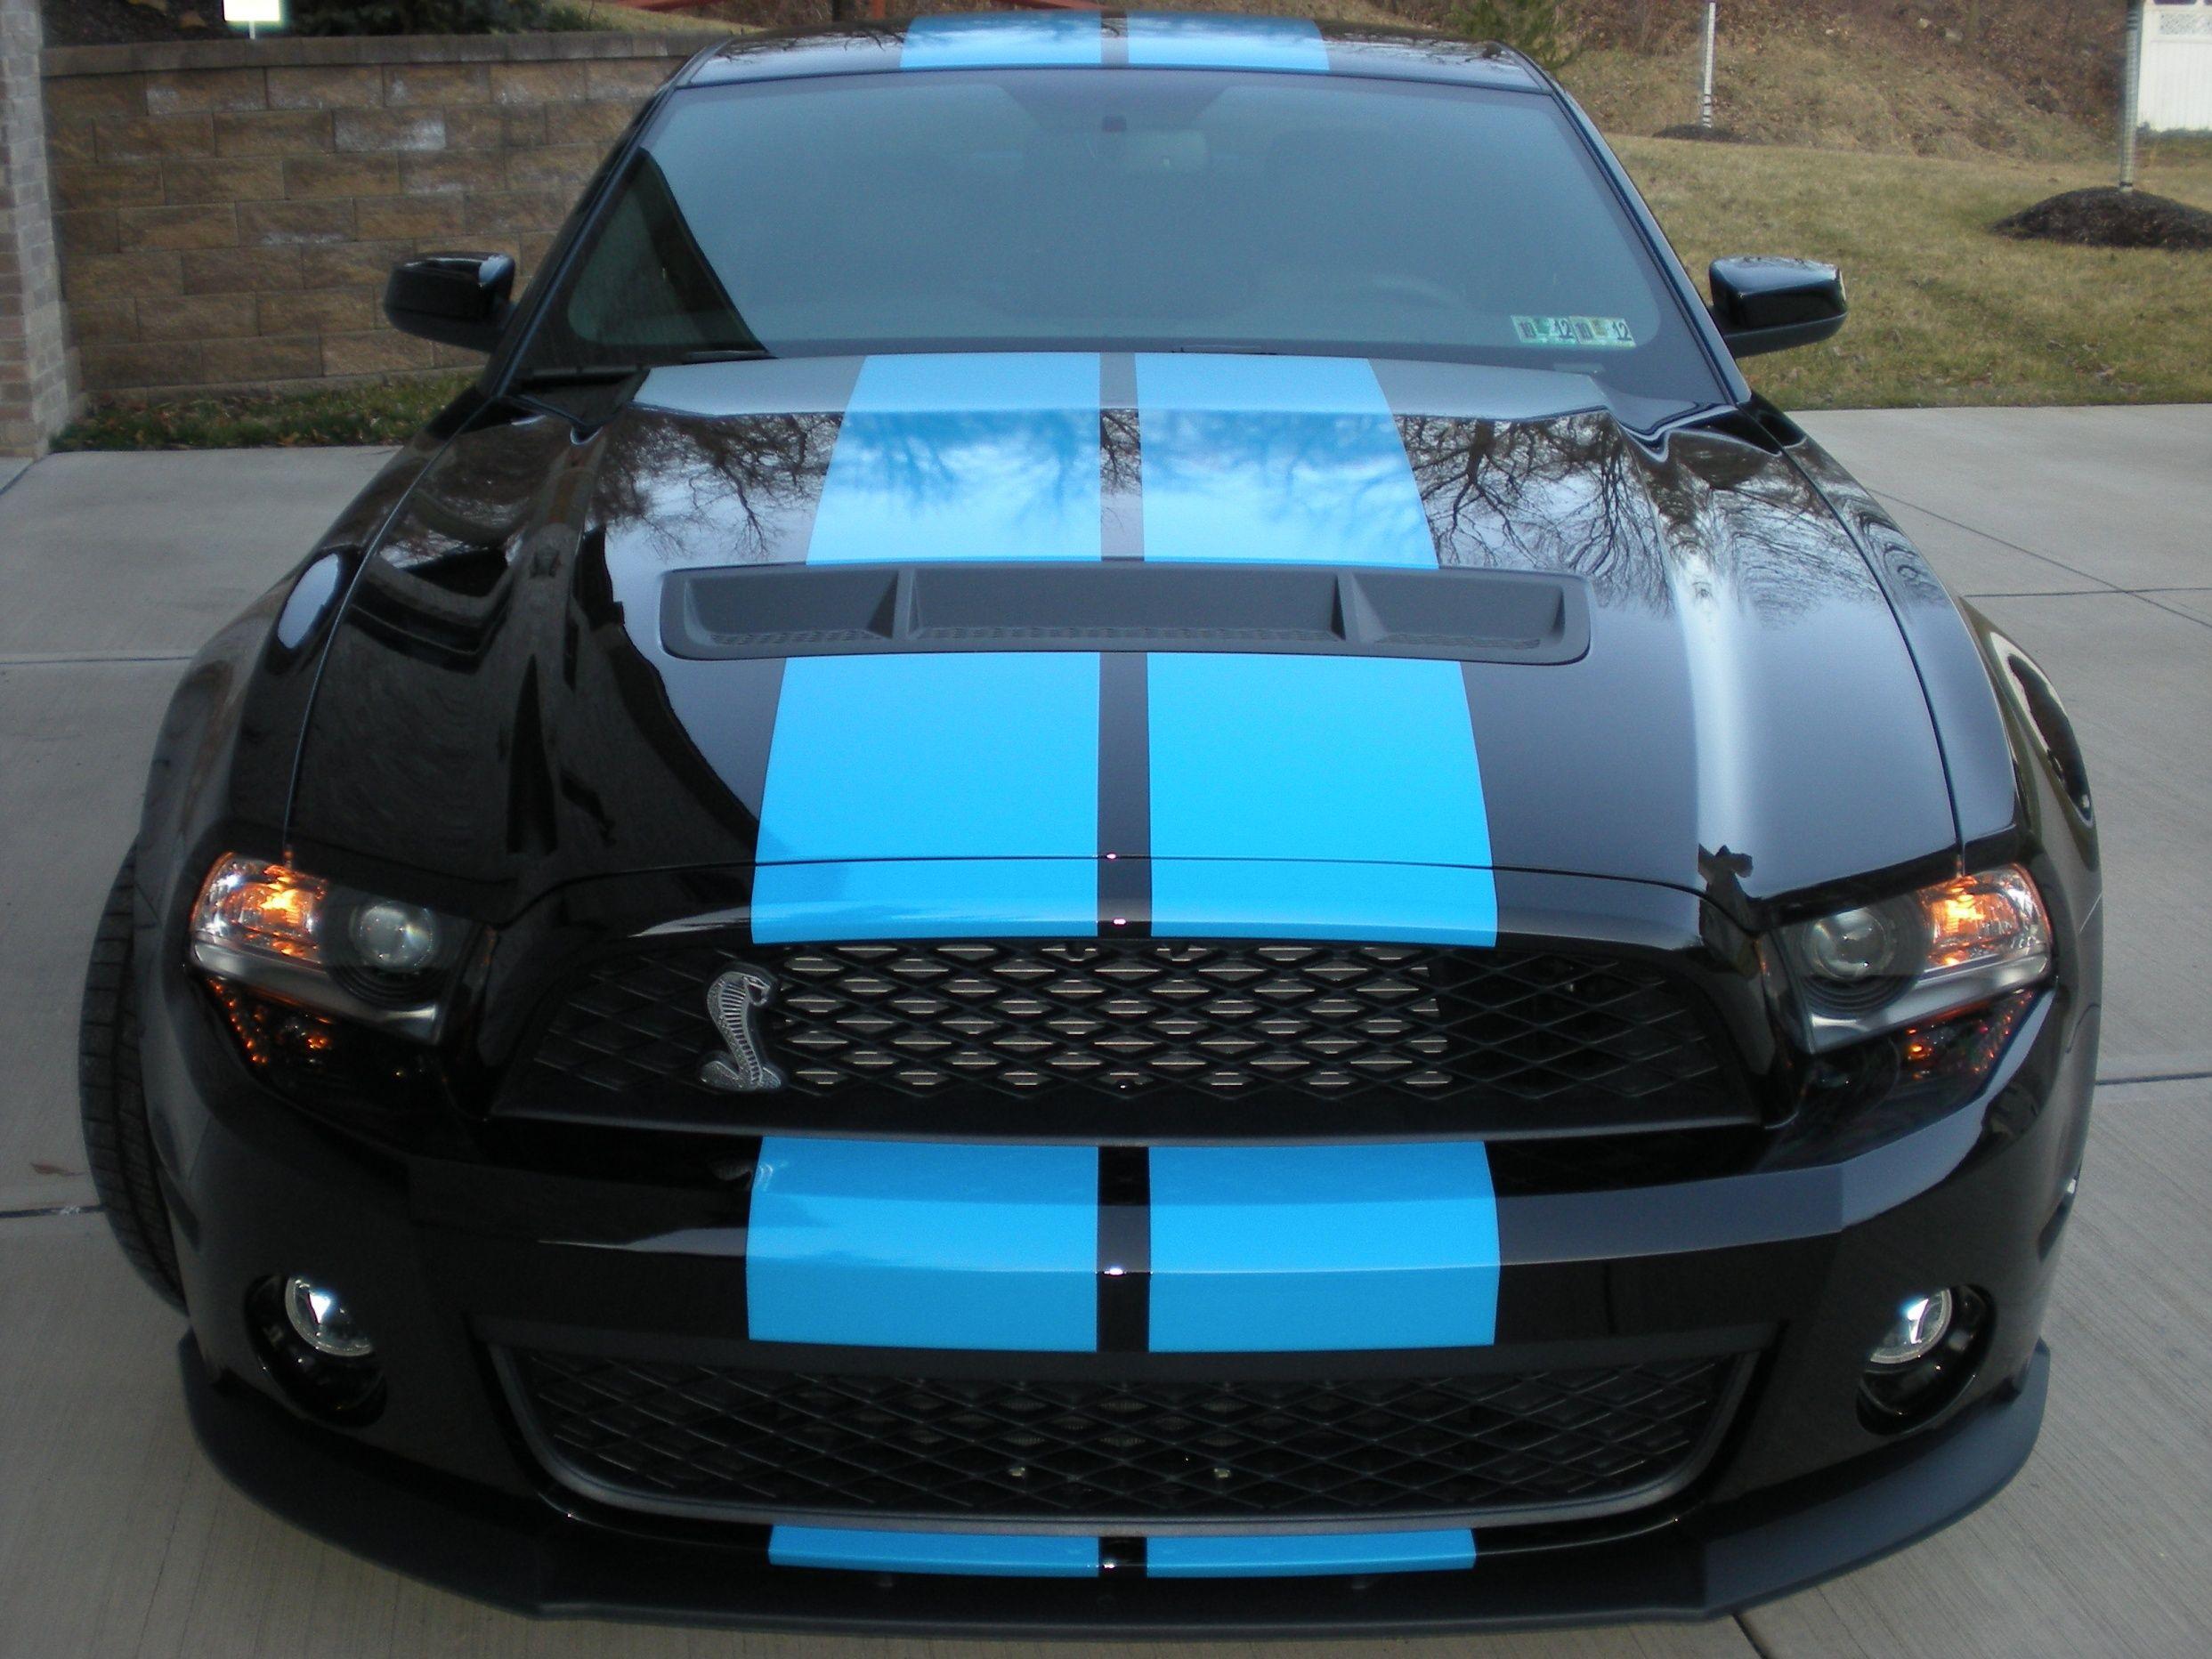 Blue and Black GT Logo - PS: Black Gt/Boss with Grabber Blue. Thoughts? - The Mustang Source ...